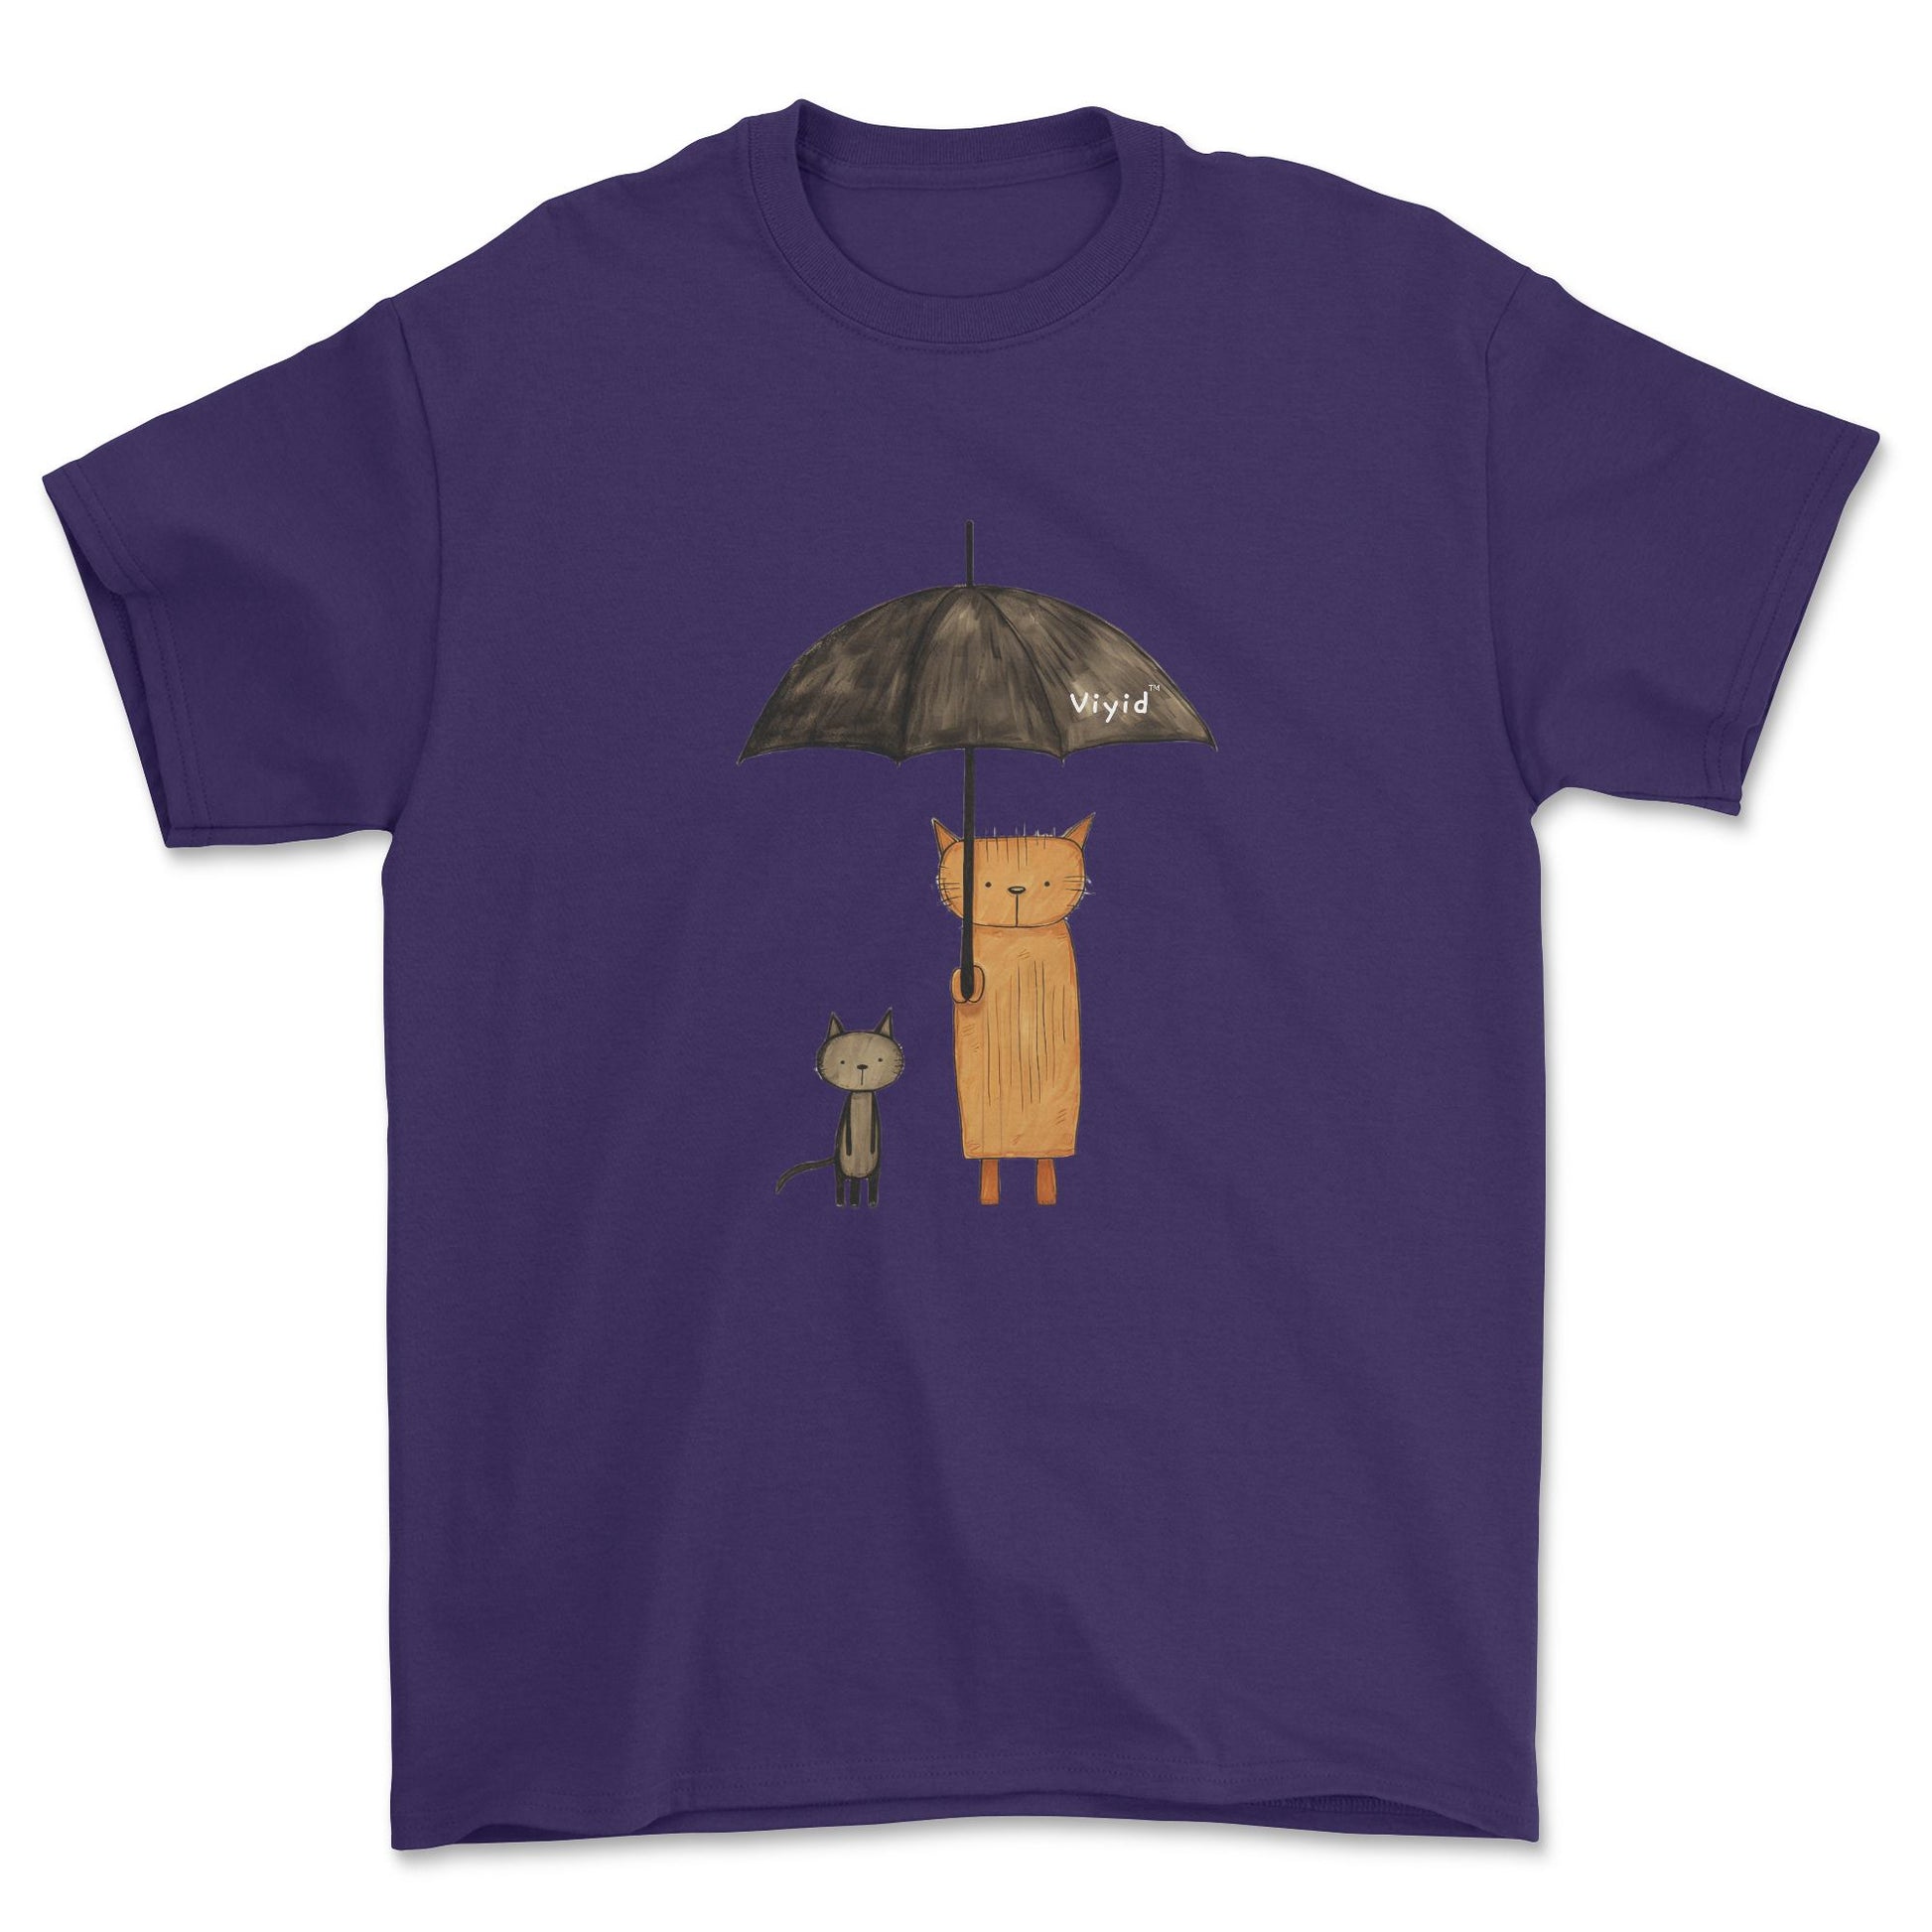 abstract cats with umbrella adult t-shirt purple